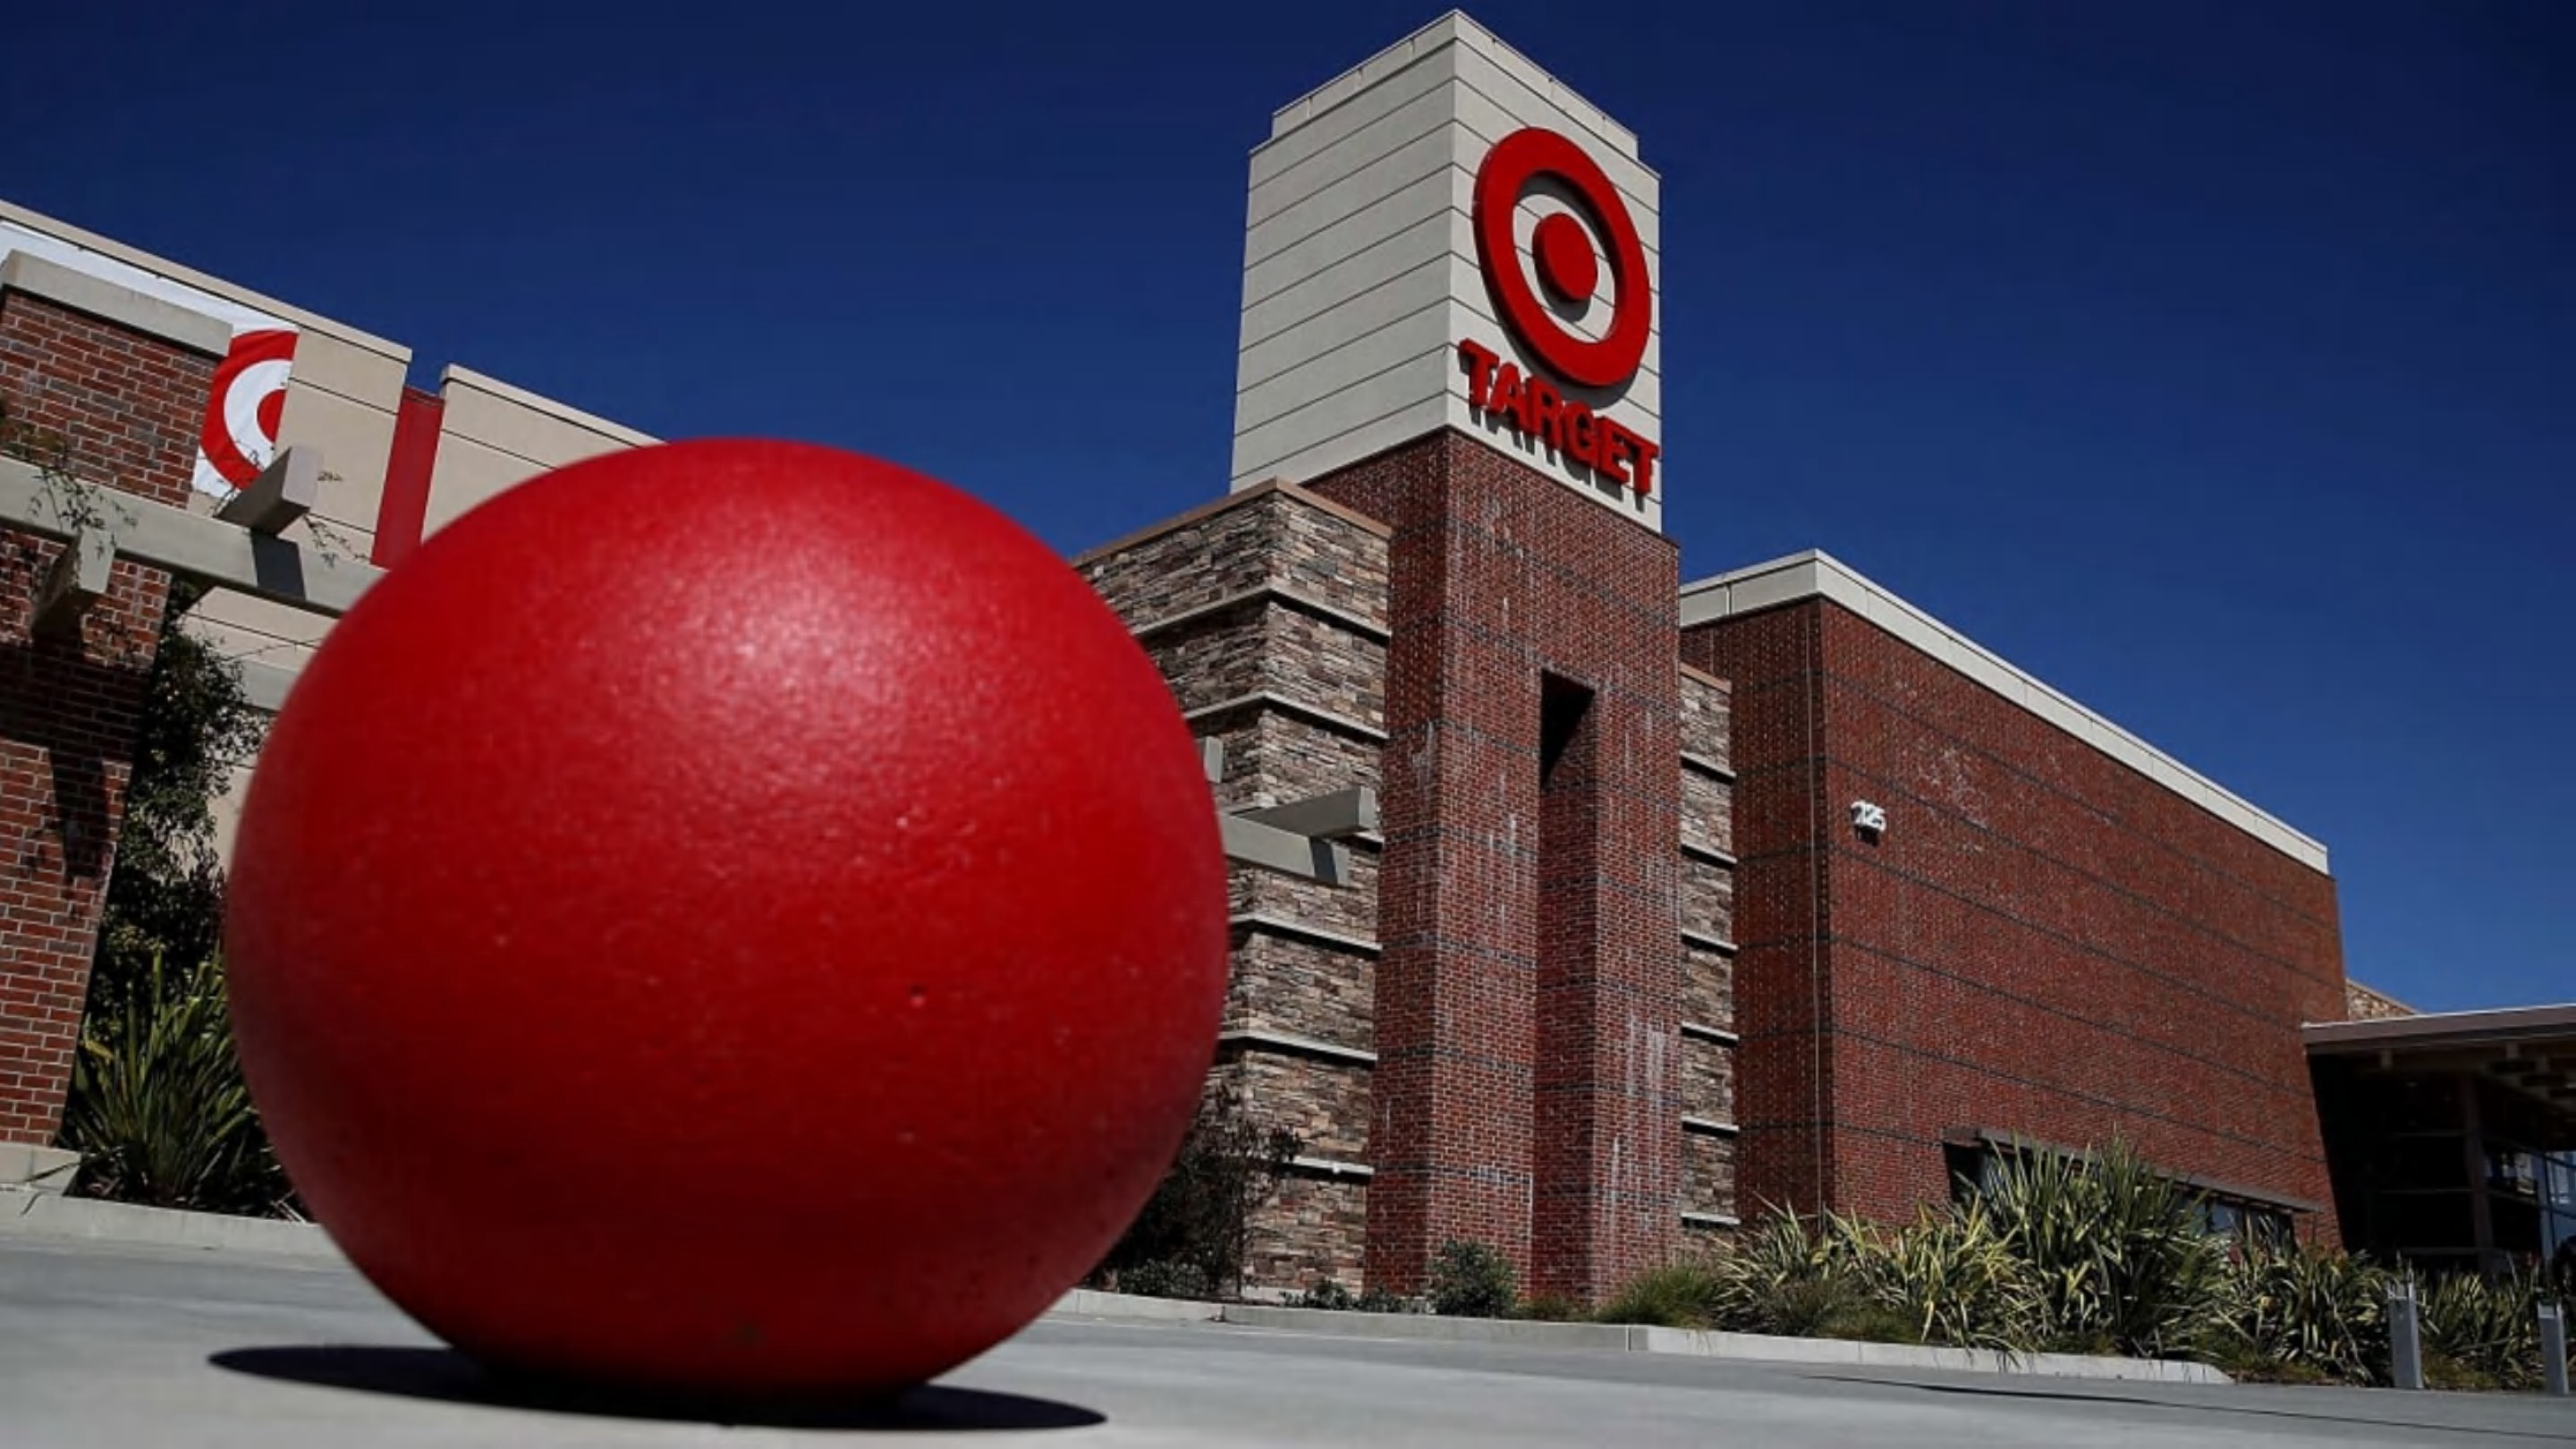 The Reason Target Has Those Giant Red Concrete Spheres Outside